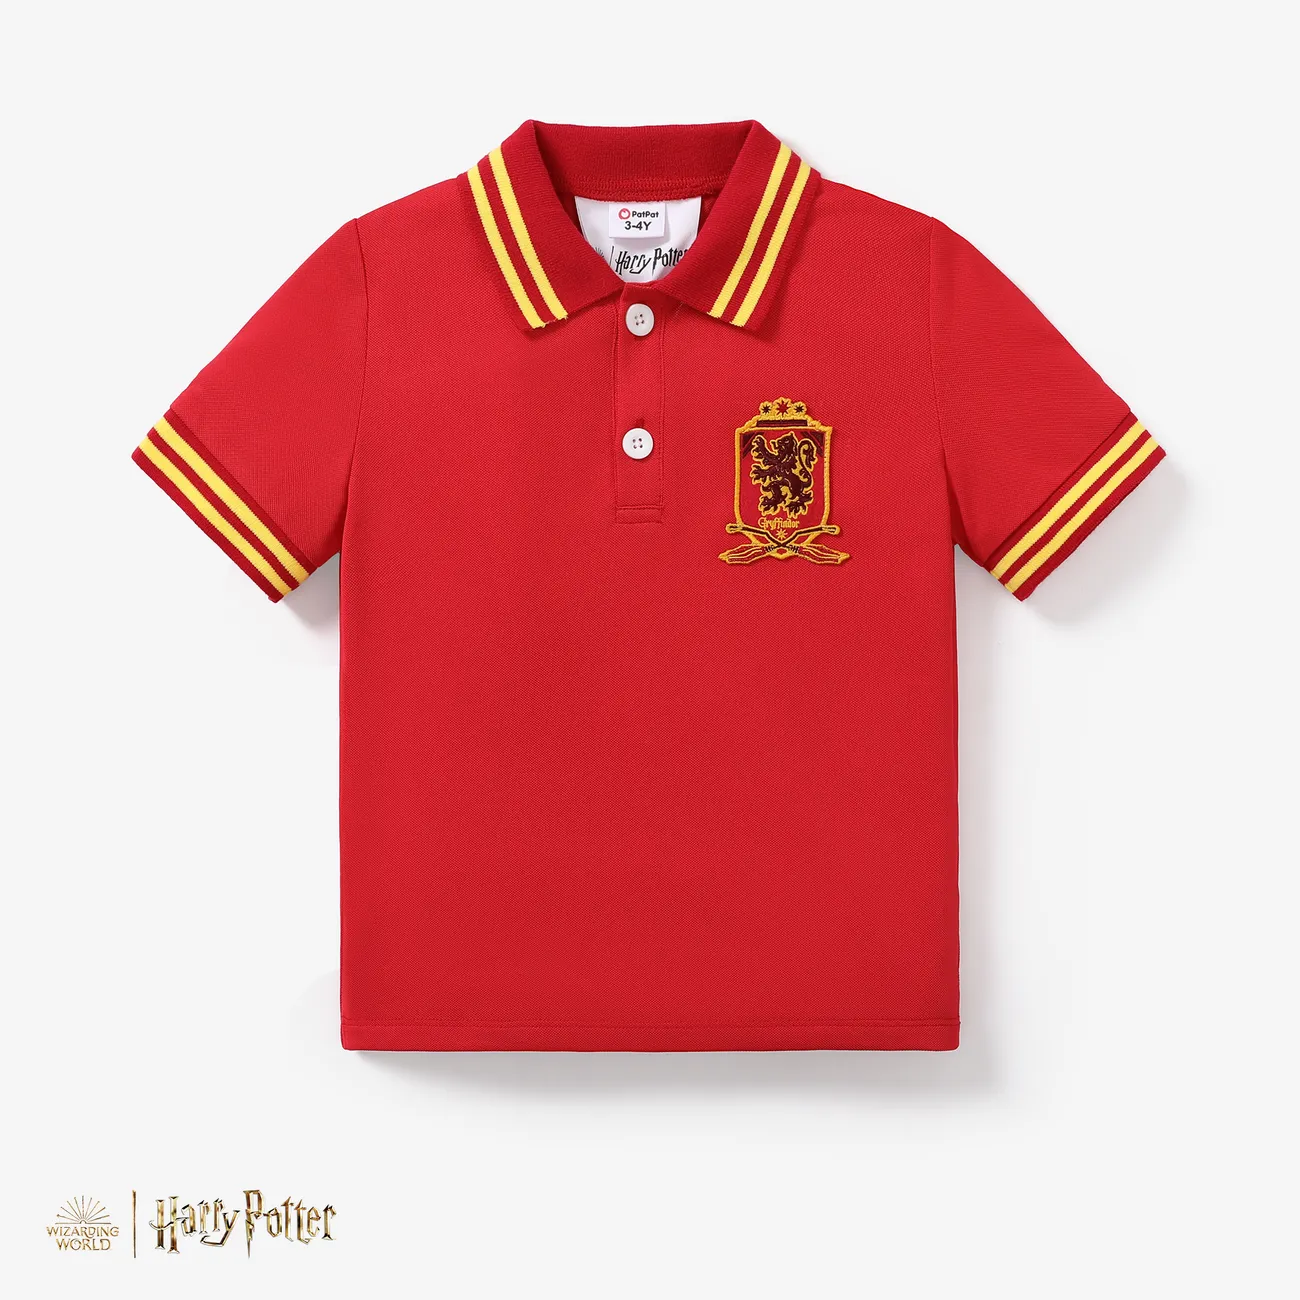 Harry Potter Toddler/Kid Boy 1pc Chess Grid pattern Preppy style Polo Shirt or Shorts
 CarmineRed big image 1